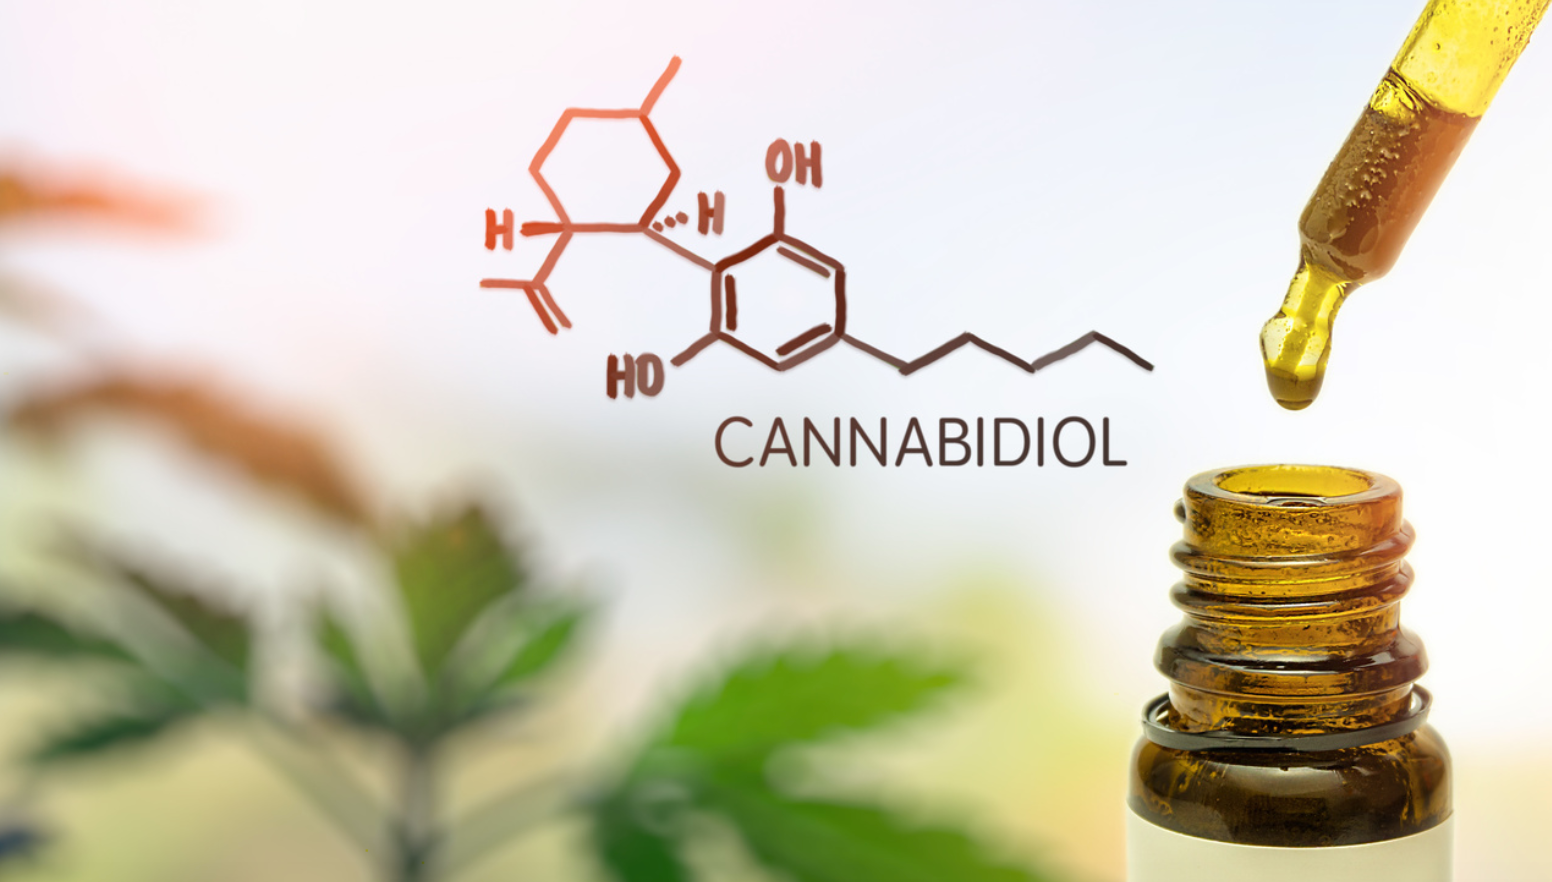 Cannabinoid products may alter effects of prescription drugs